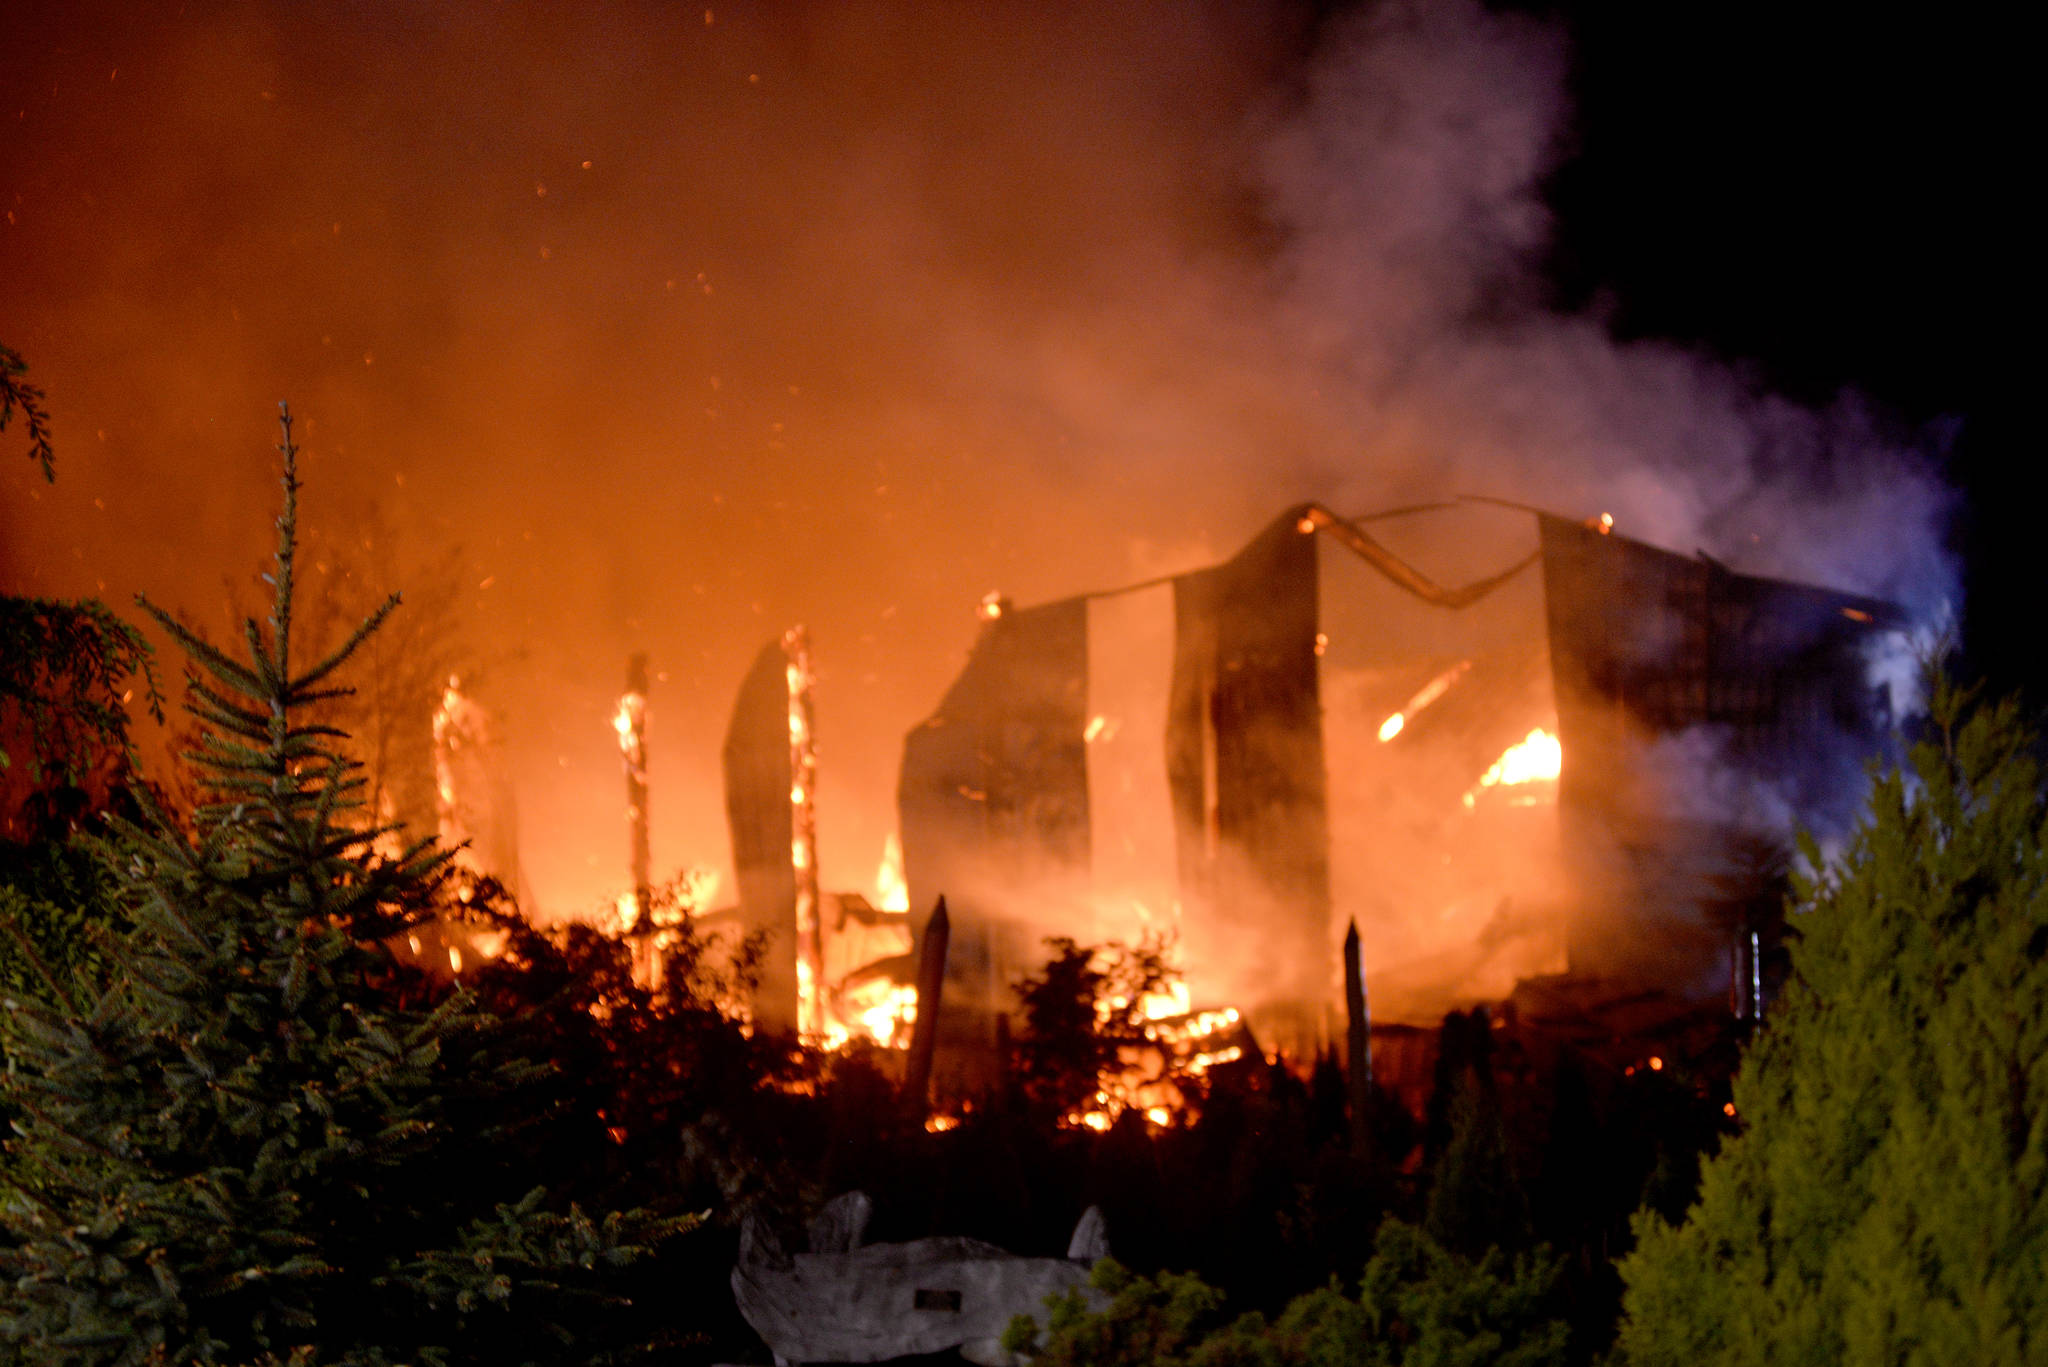 DAVE HAVILAND | THE DAILY WORLD
Fire destroys the spirit production building for Ocean’s Daughter Distillery, a subsidiary of Westport Winery